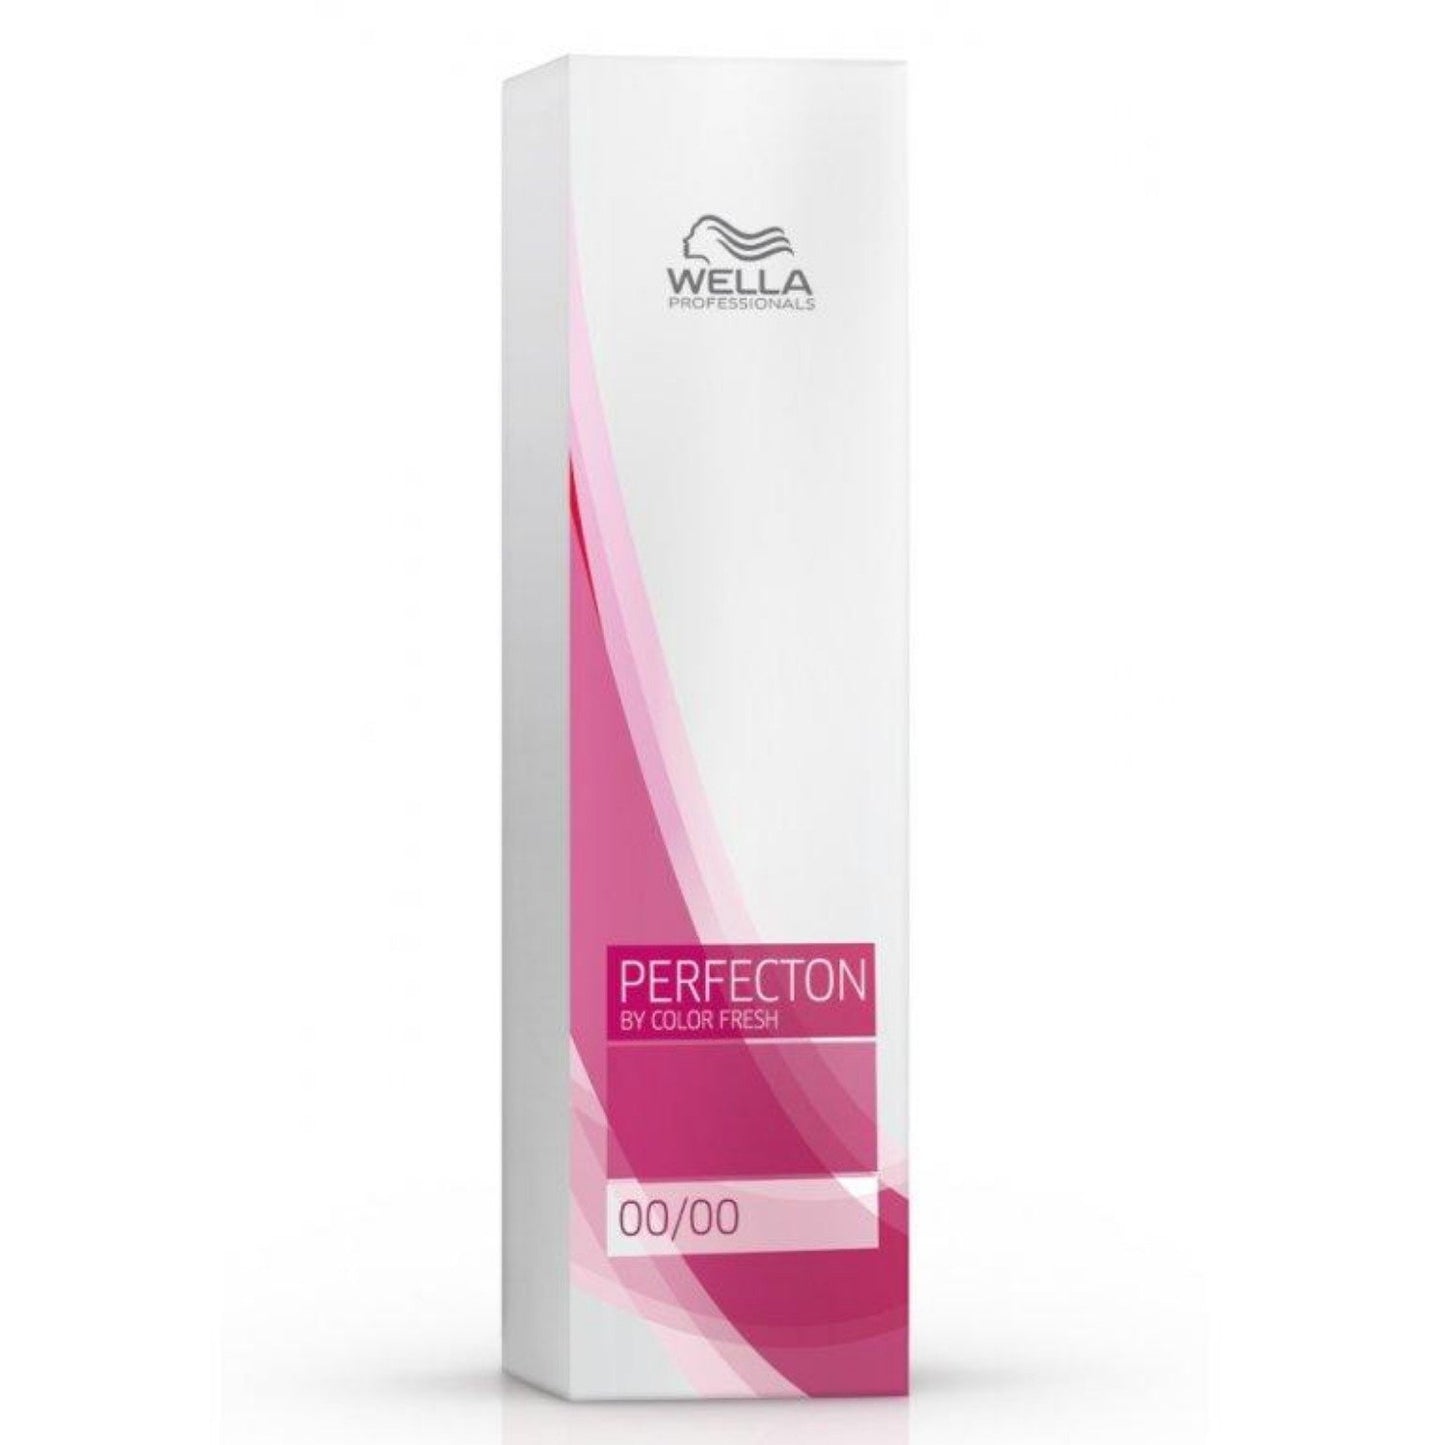 Wella Perfecton Leave In Colour 250ml, /6 Violet